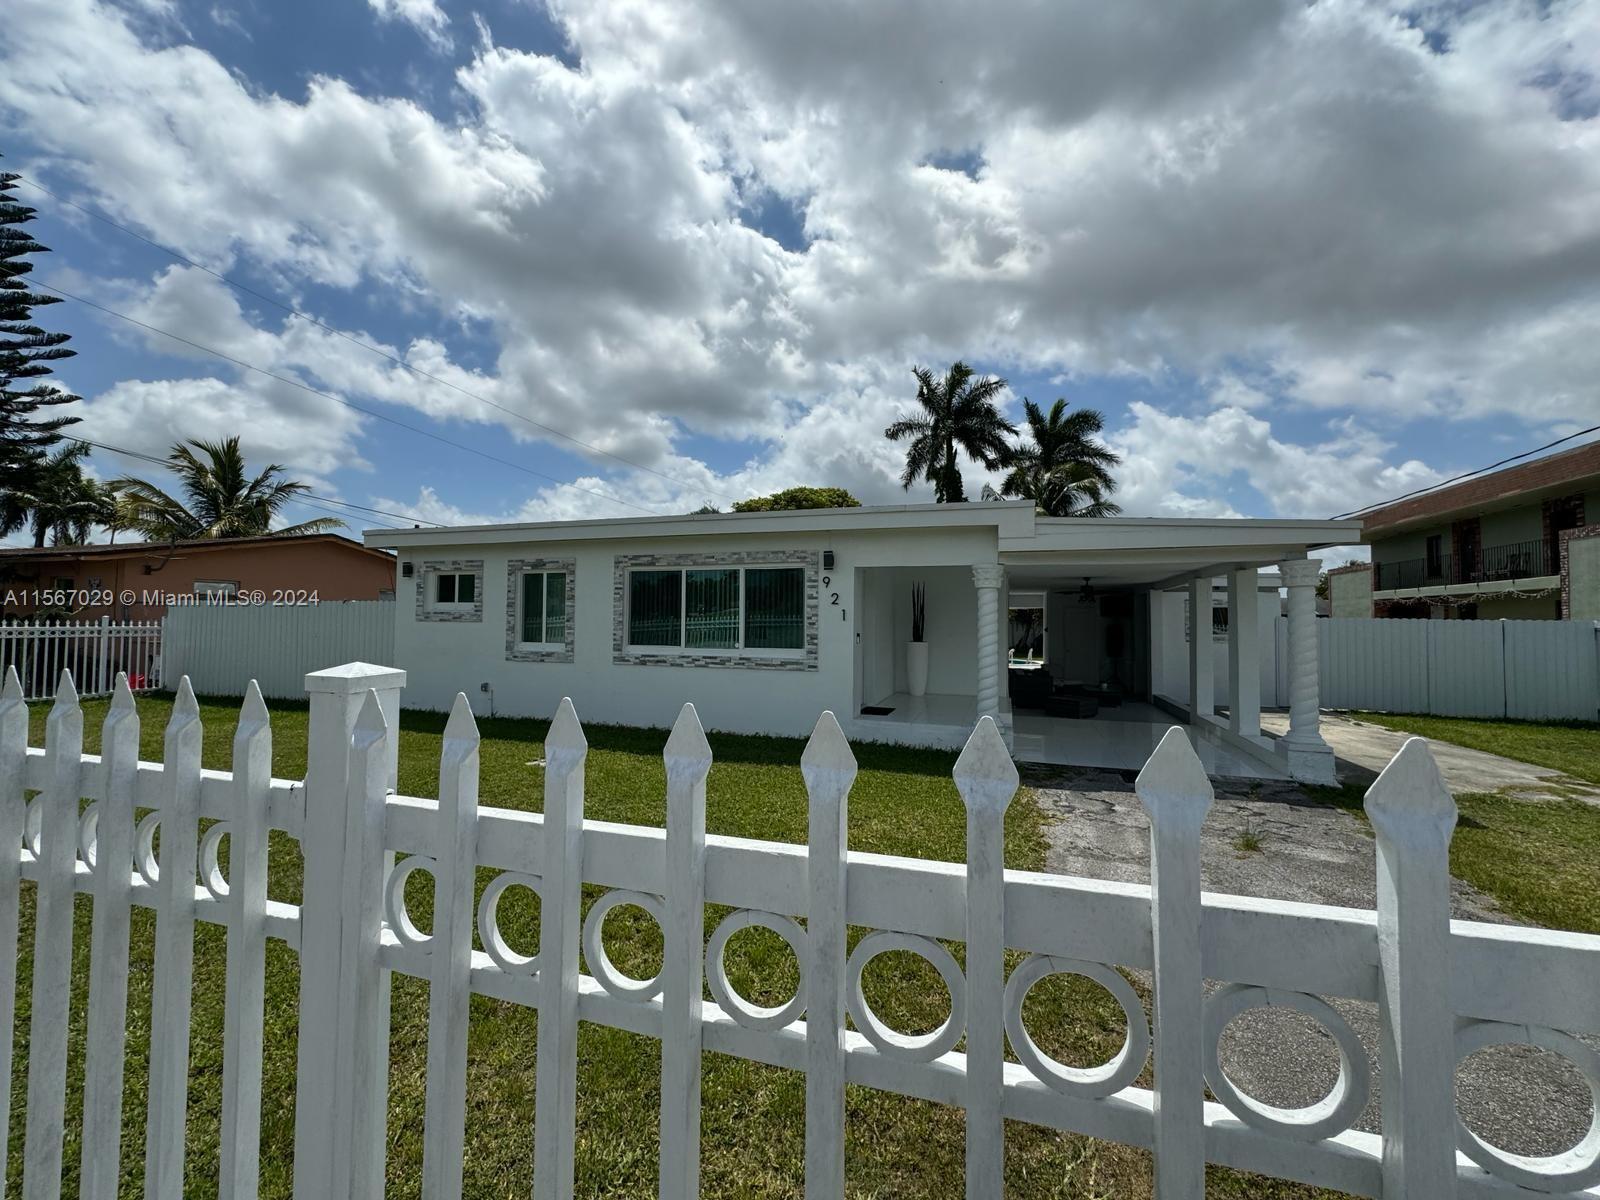 Completely remodeled 3/2 POOL home. Modern ceramic tile. The kitchen features high end  stainless steel appliances. Remodeled bathrooms.  Pool area is perfect for entertaining.  Close to highways, the FLorida Keys, schools, hospital, shopping and restaurants.